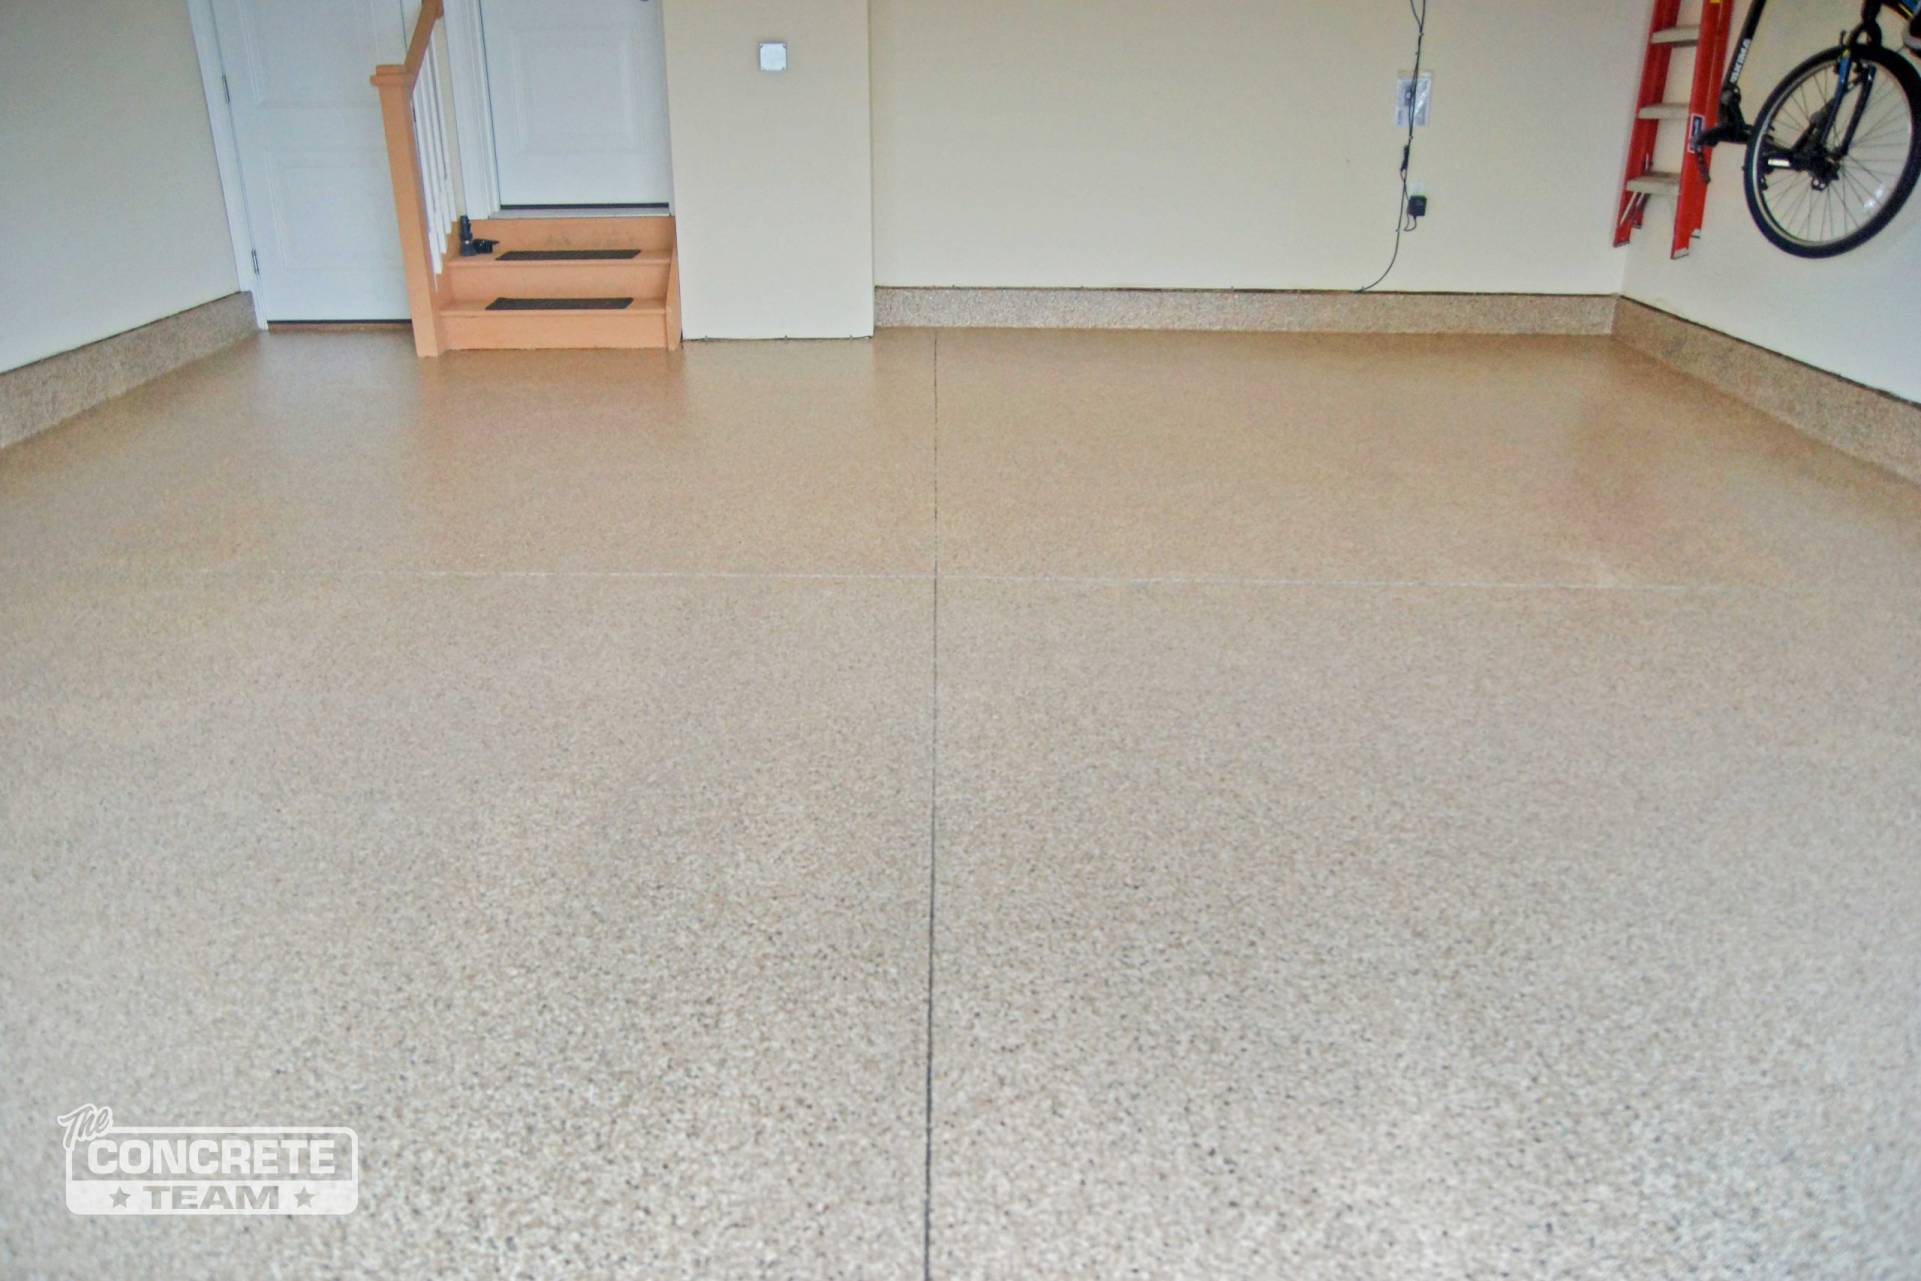 Garage with a smooth concrete floor